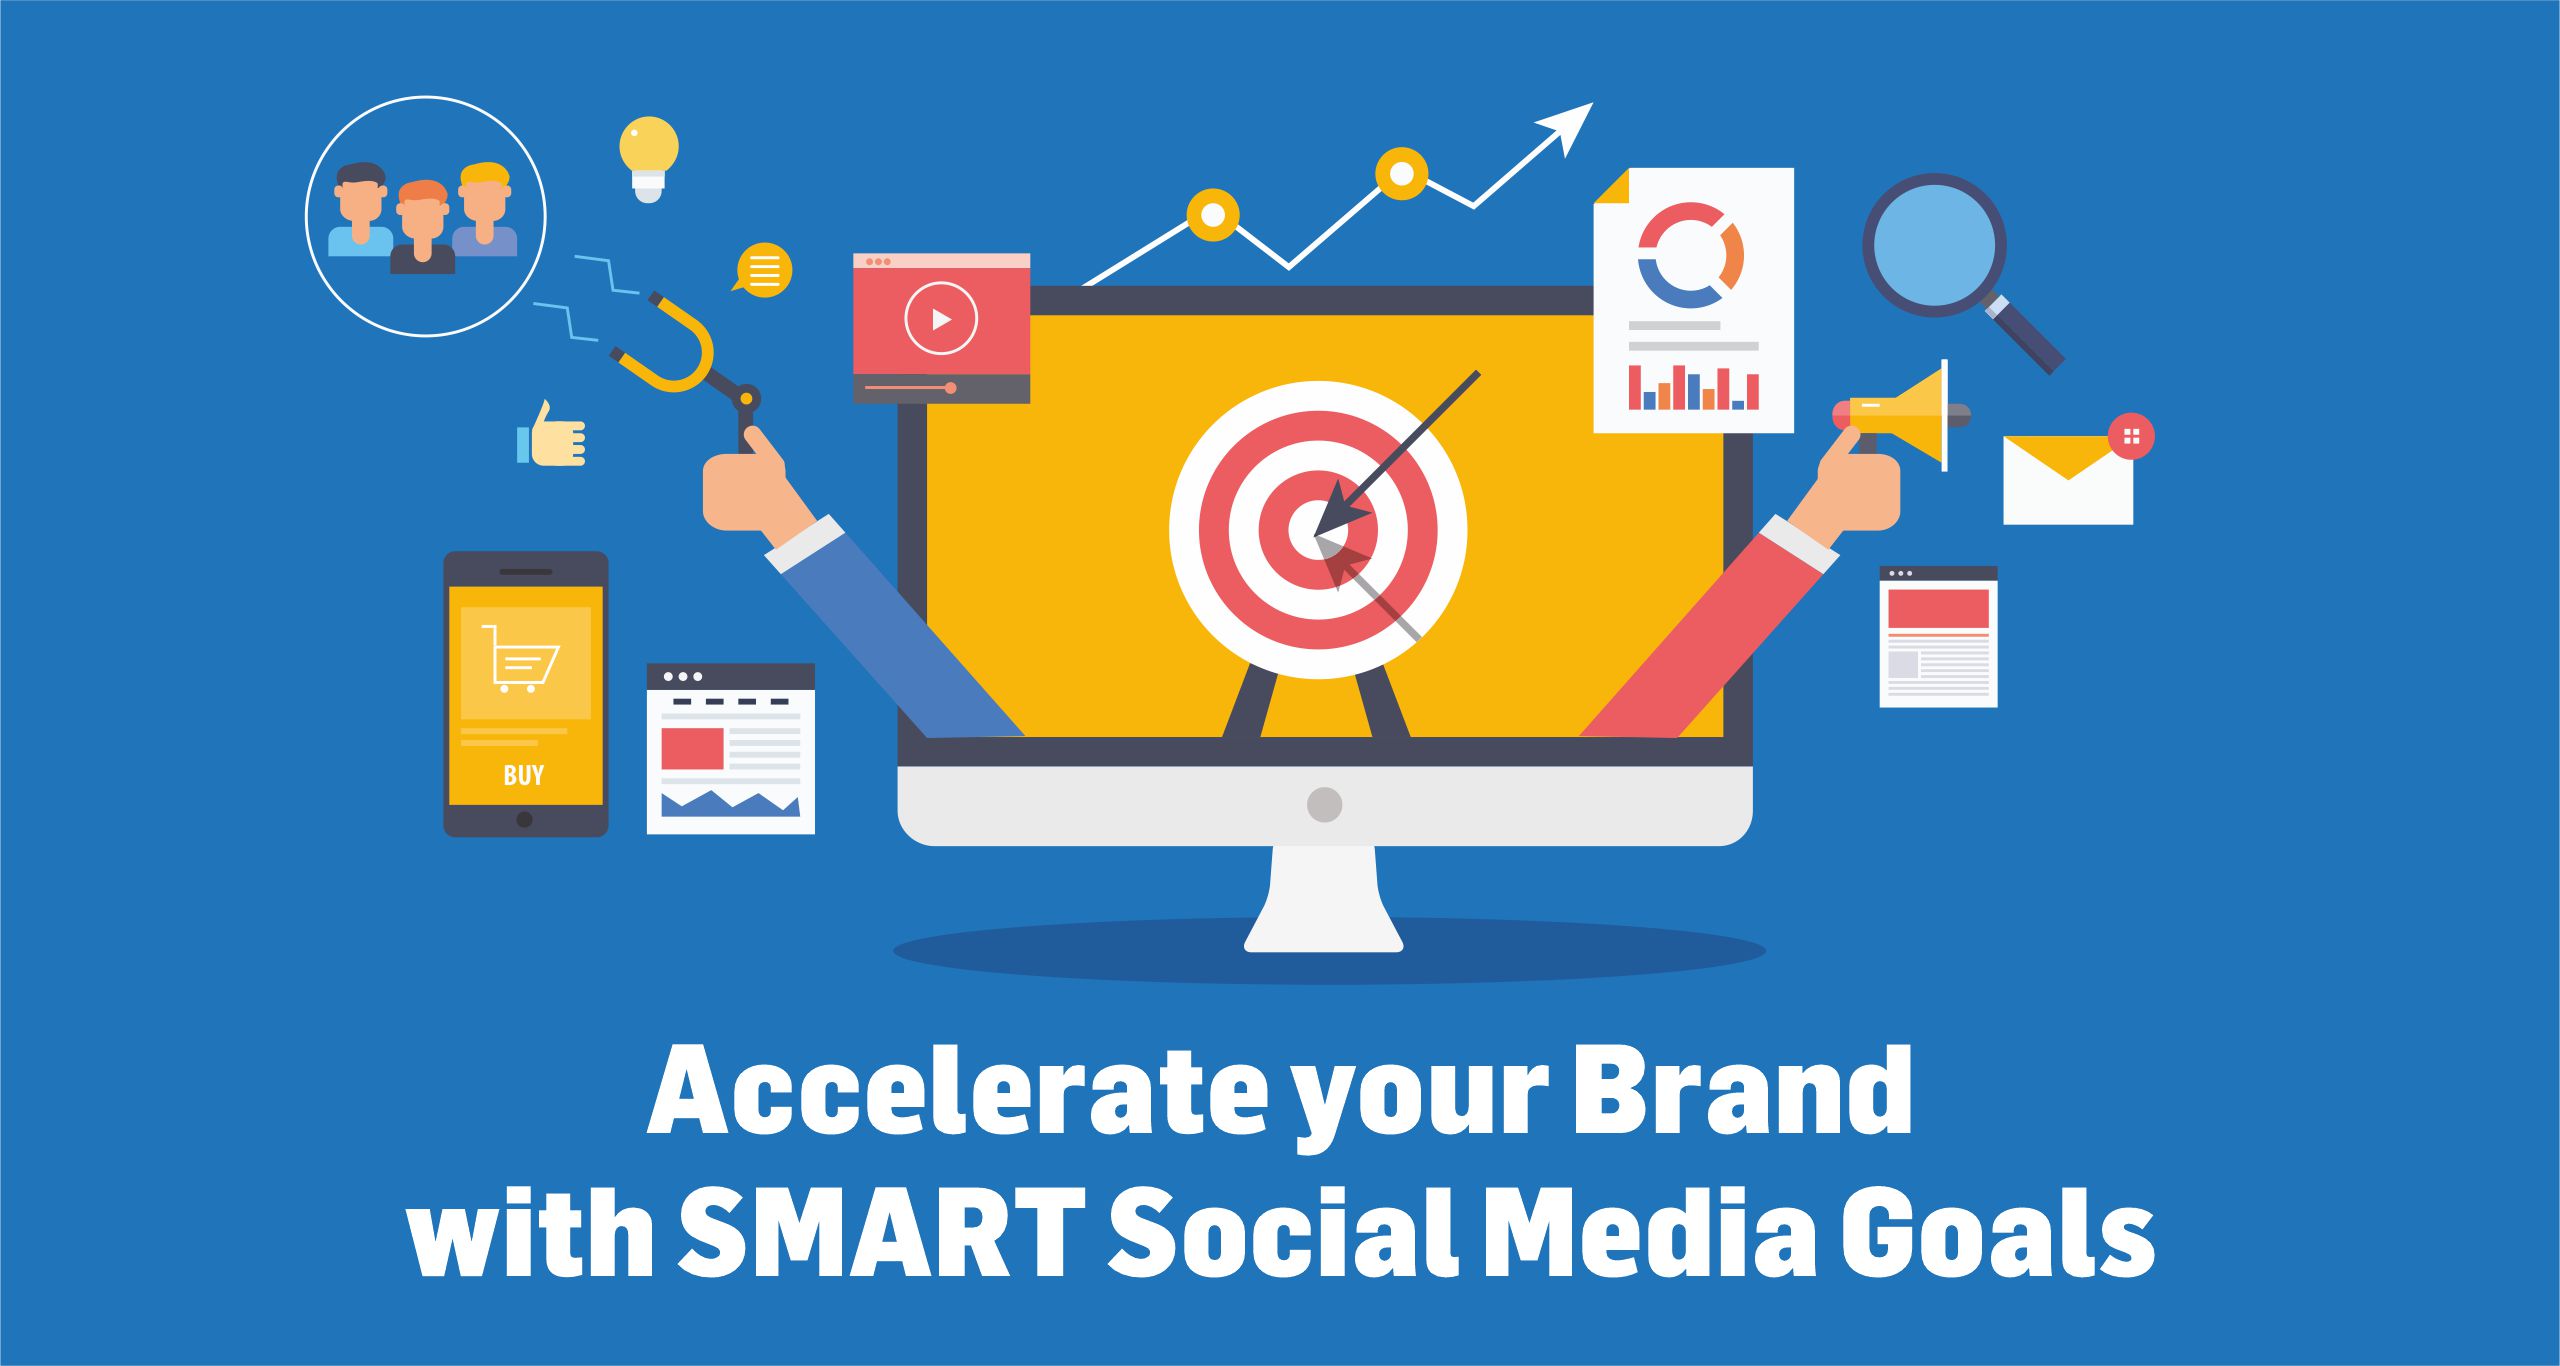 Accelerate your Brand with SMART Social Media Goals